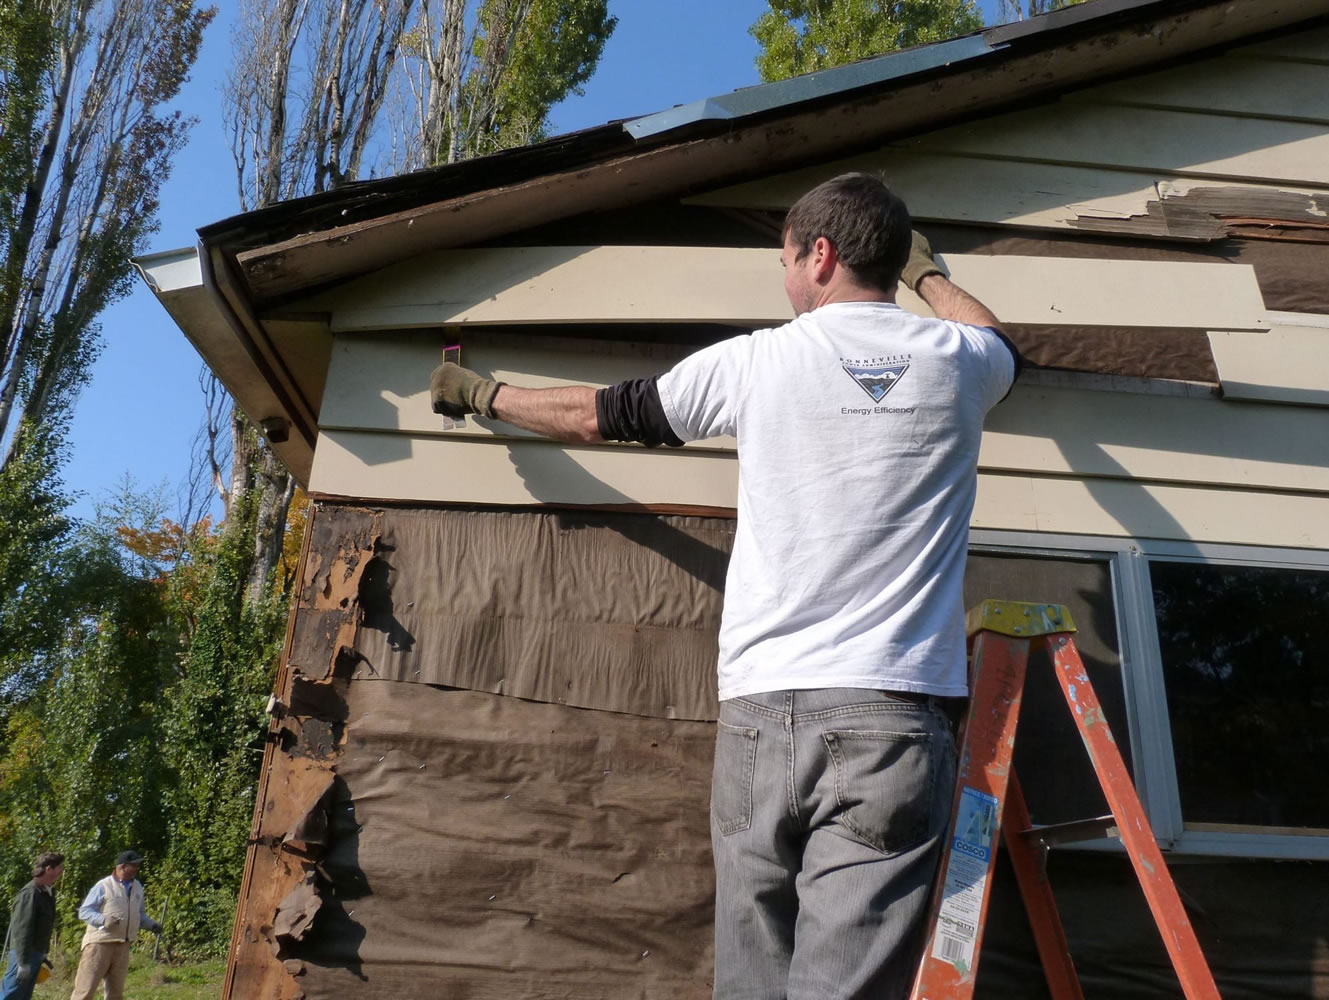 Bagley Downs: Bonneville Power Administration energy efficiency specialist Rick Hodges removes old siding from a home during a volunteer weatherization day event.